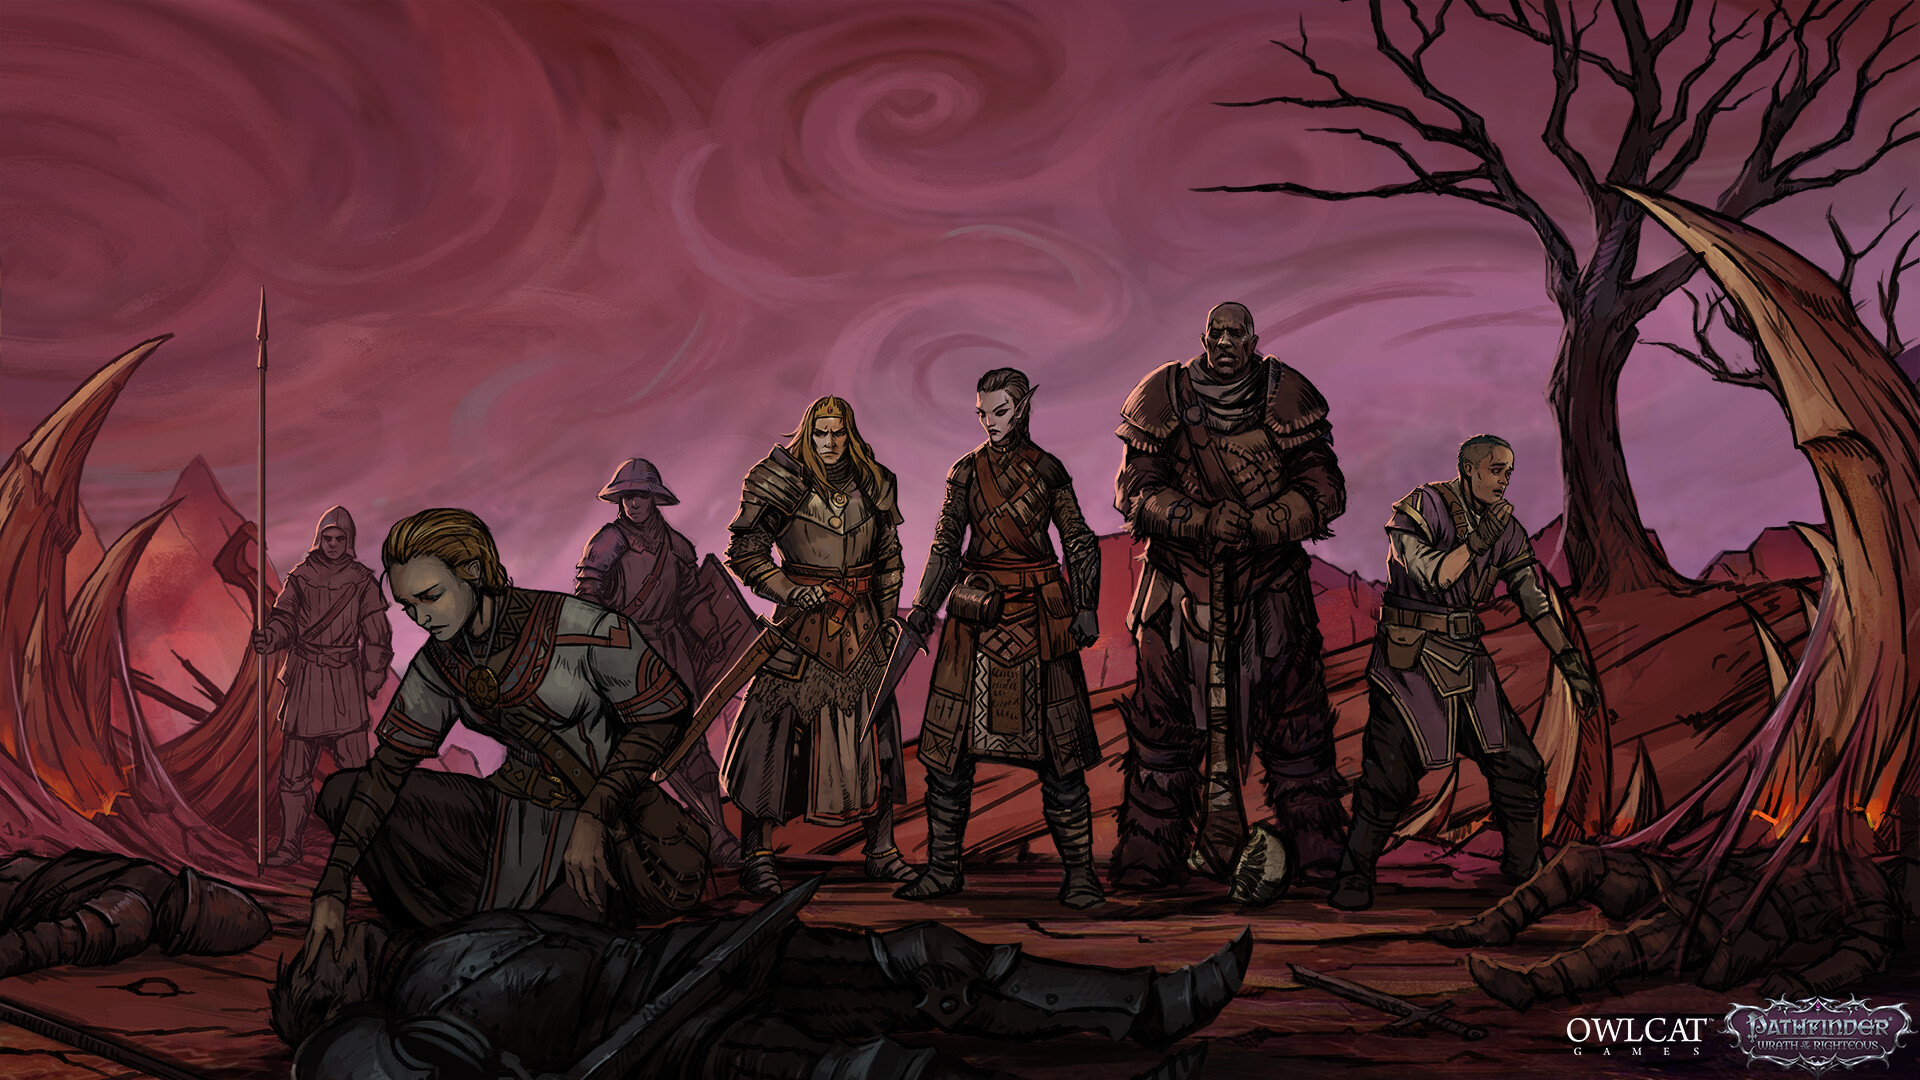 Pathfinder: Wrath of the Righteous HD desktop wallpaper featuring an illustrated group of fantasy characters ready for battle in a dark, mystical landscape.